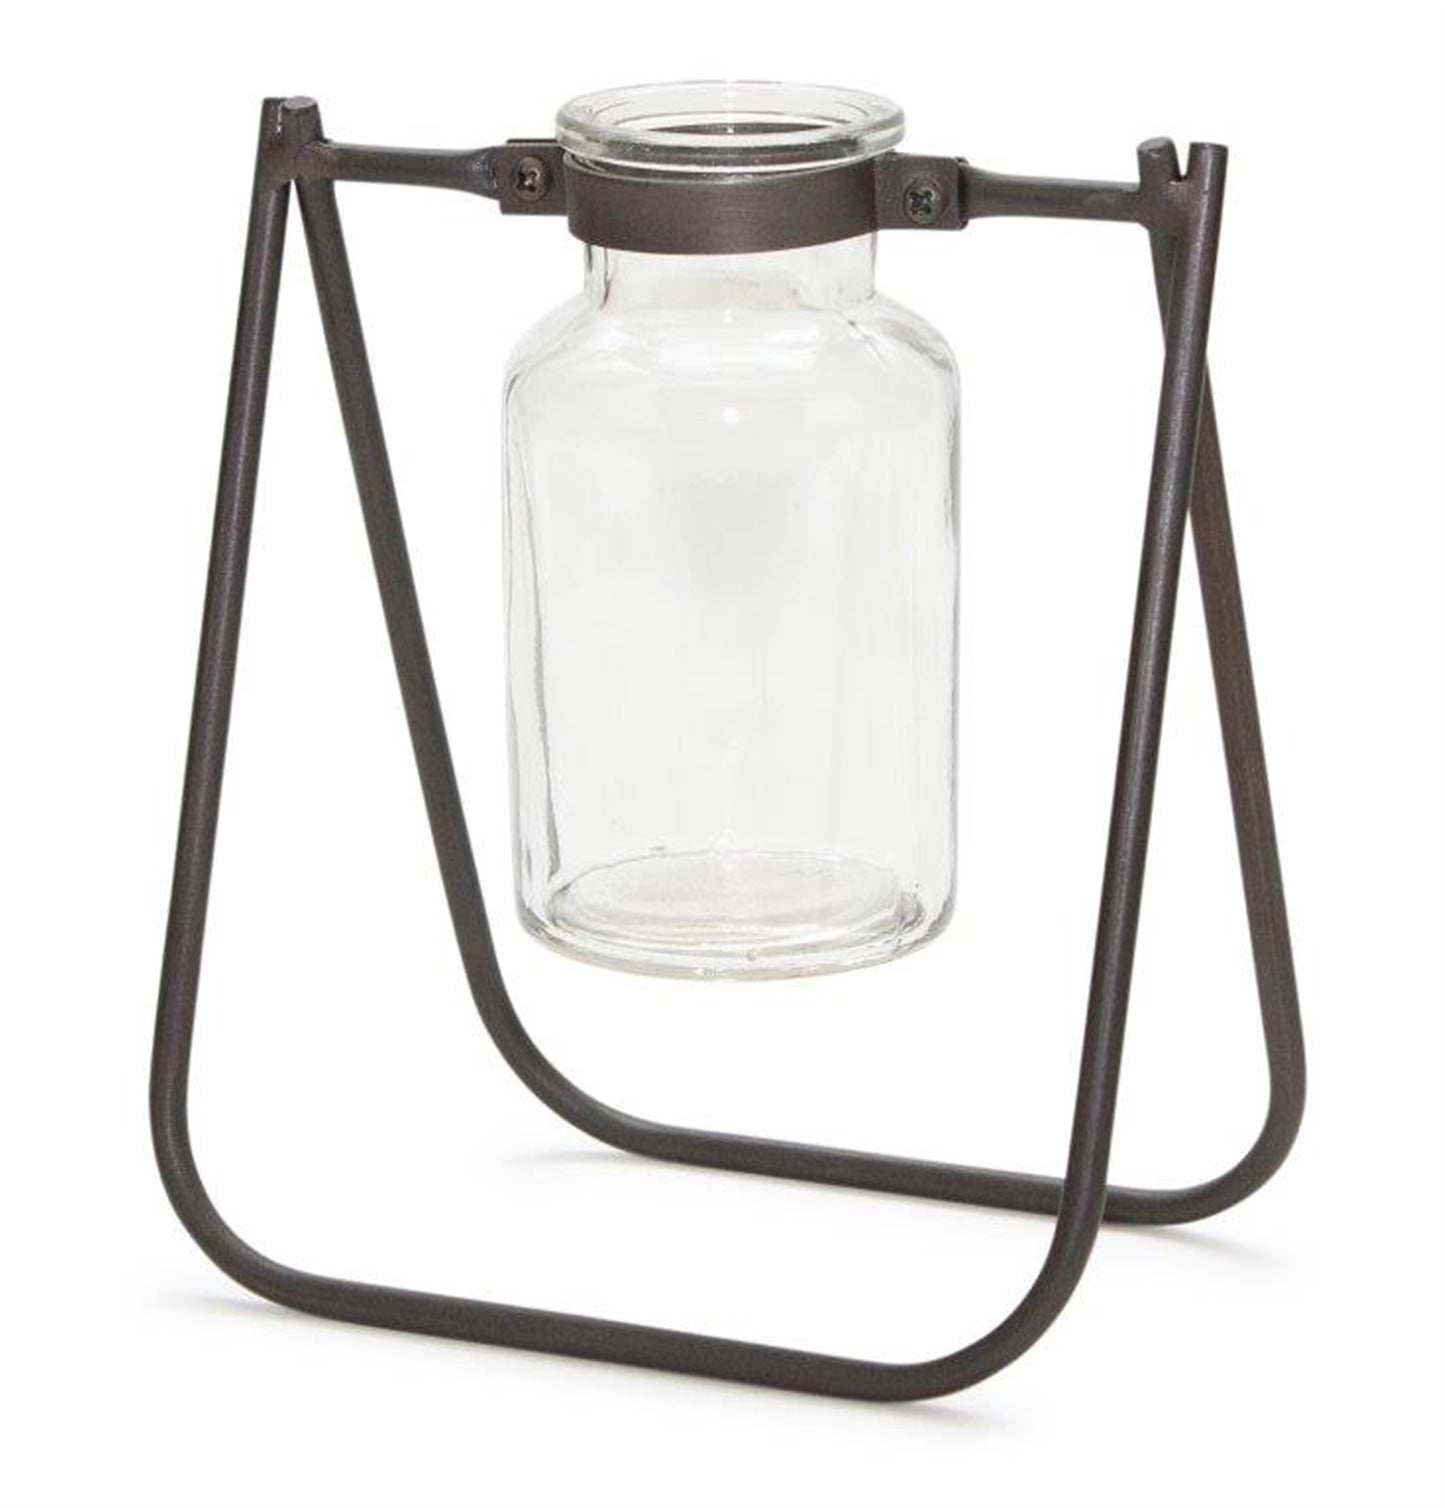 Jar with Stand (Set of 2) 6"L x 6.75"H Iron/Glass